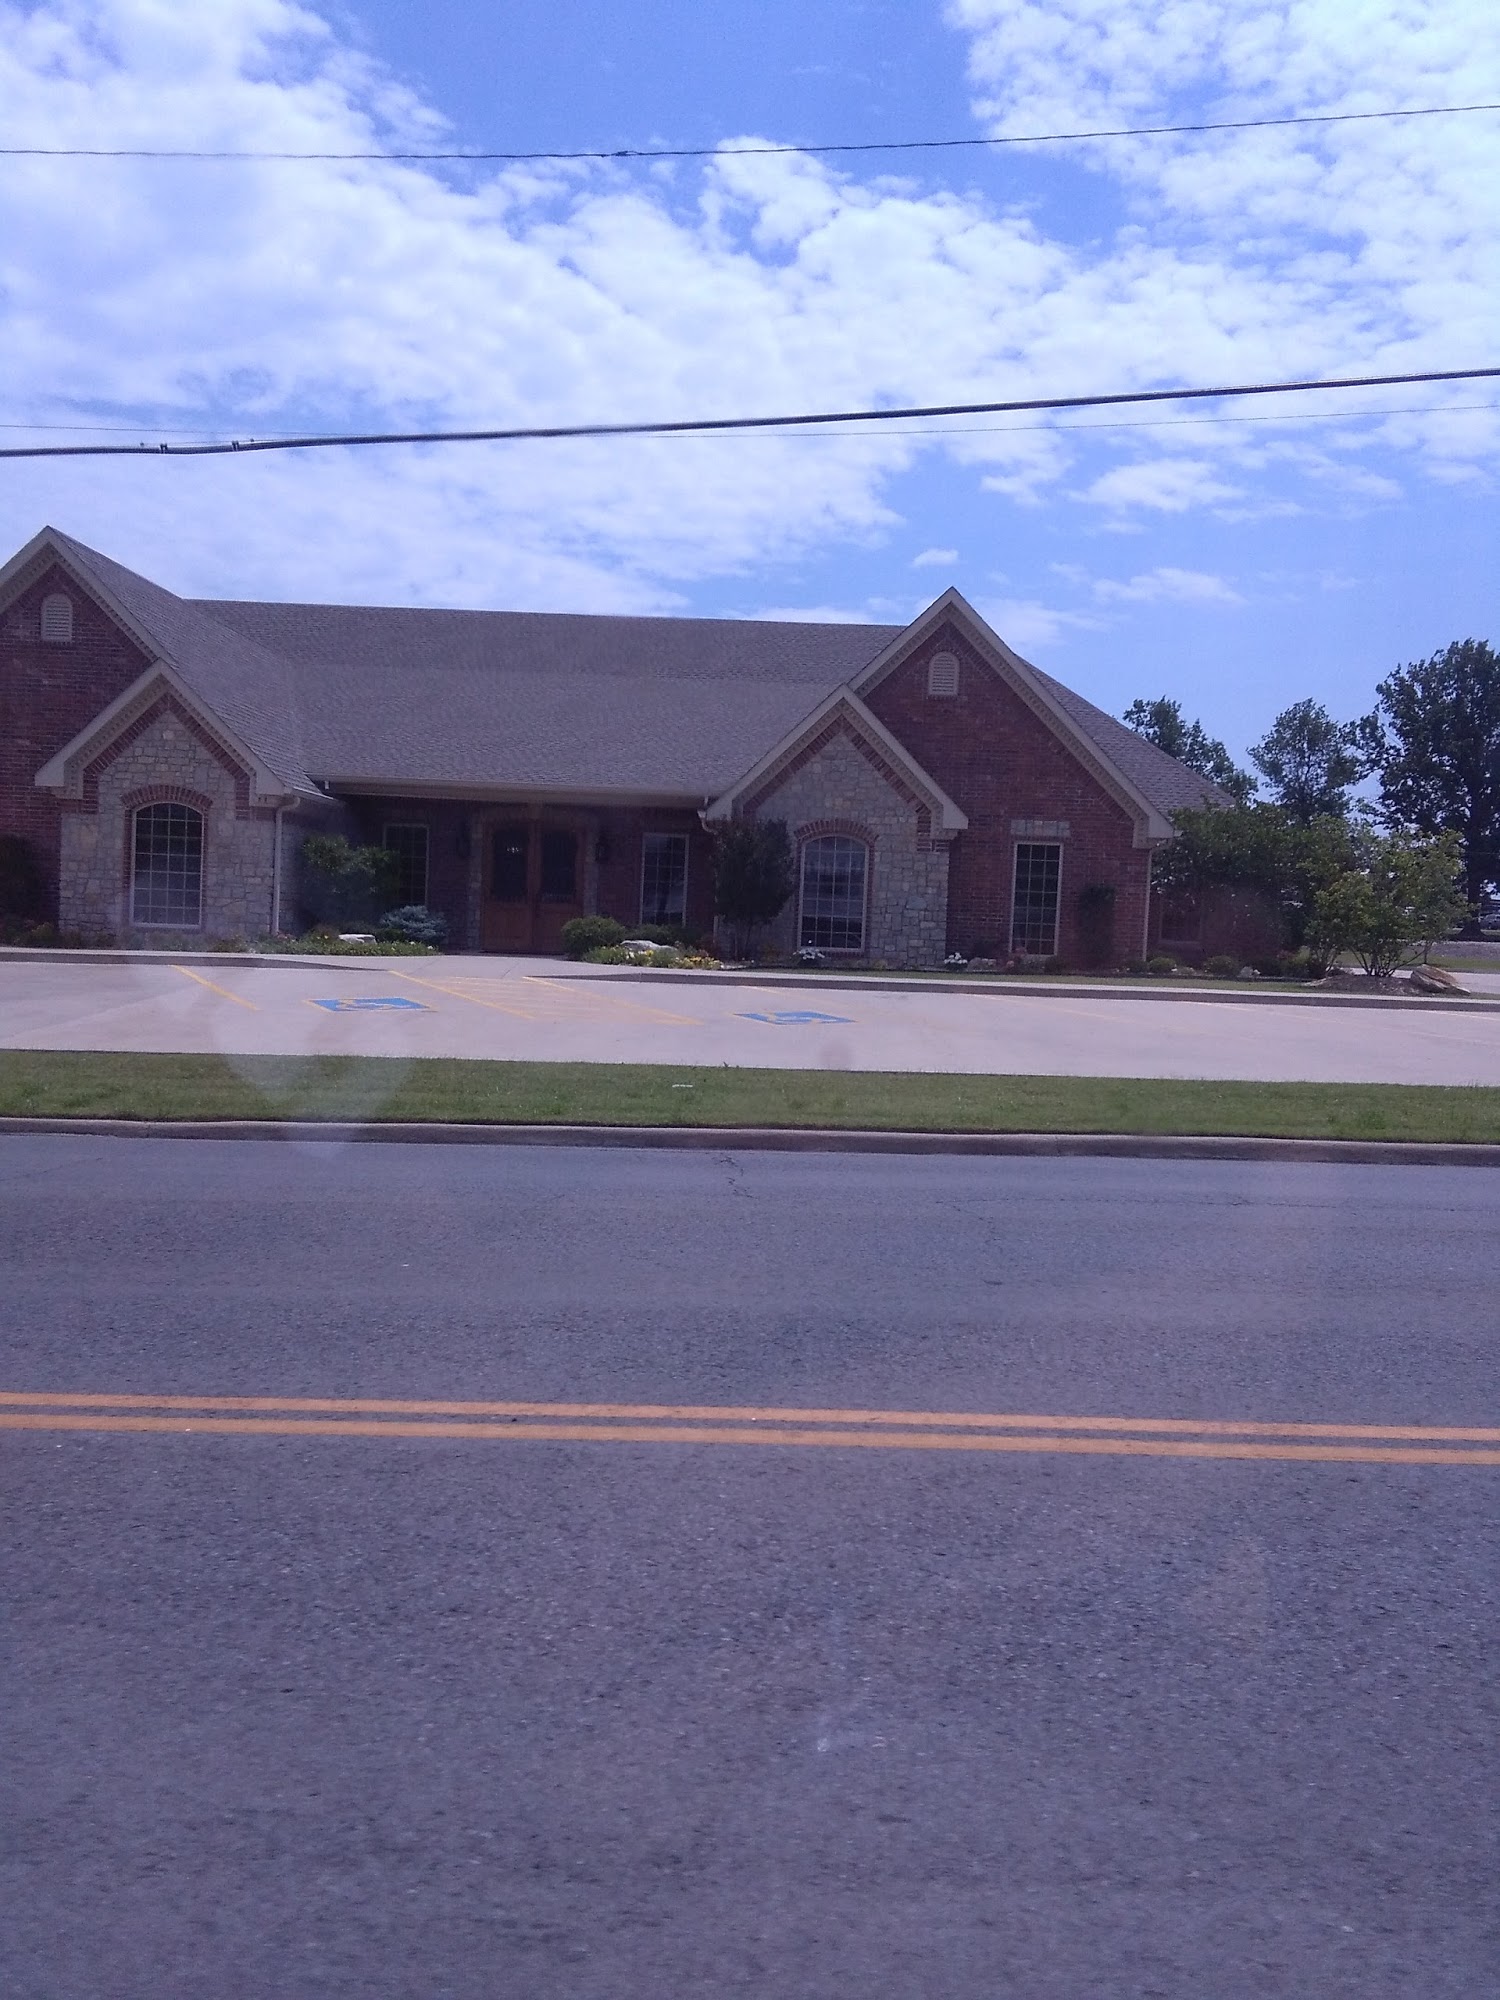 Cornerstone Funeral Home and Crematory